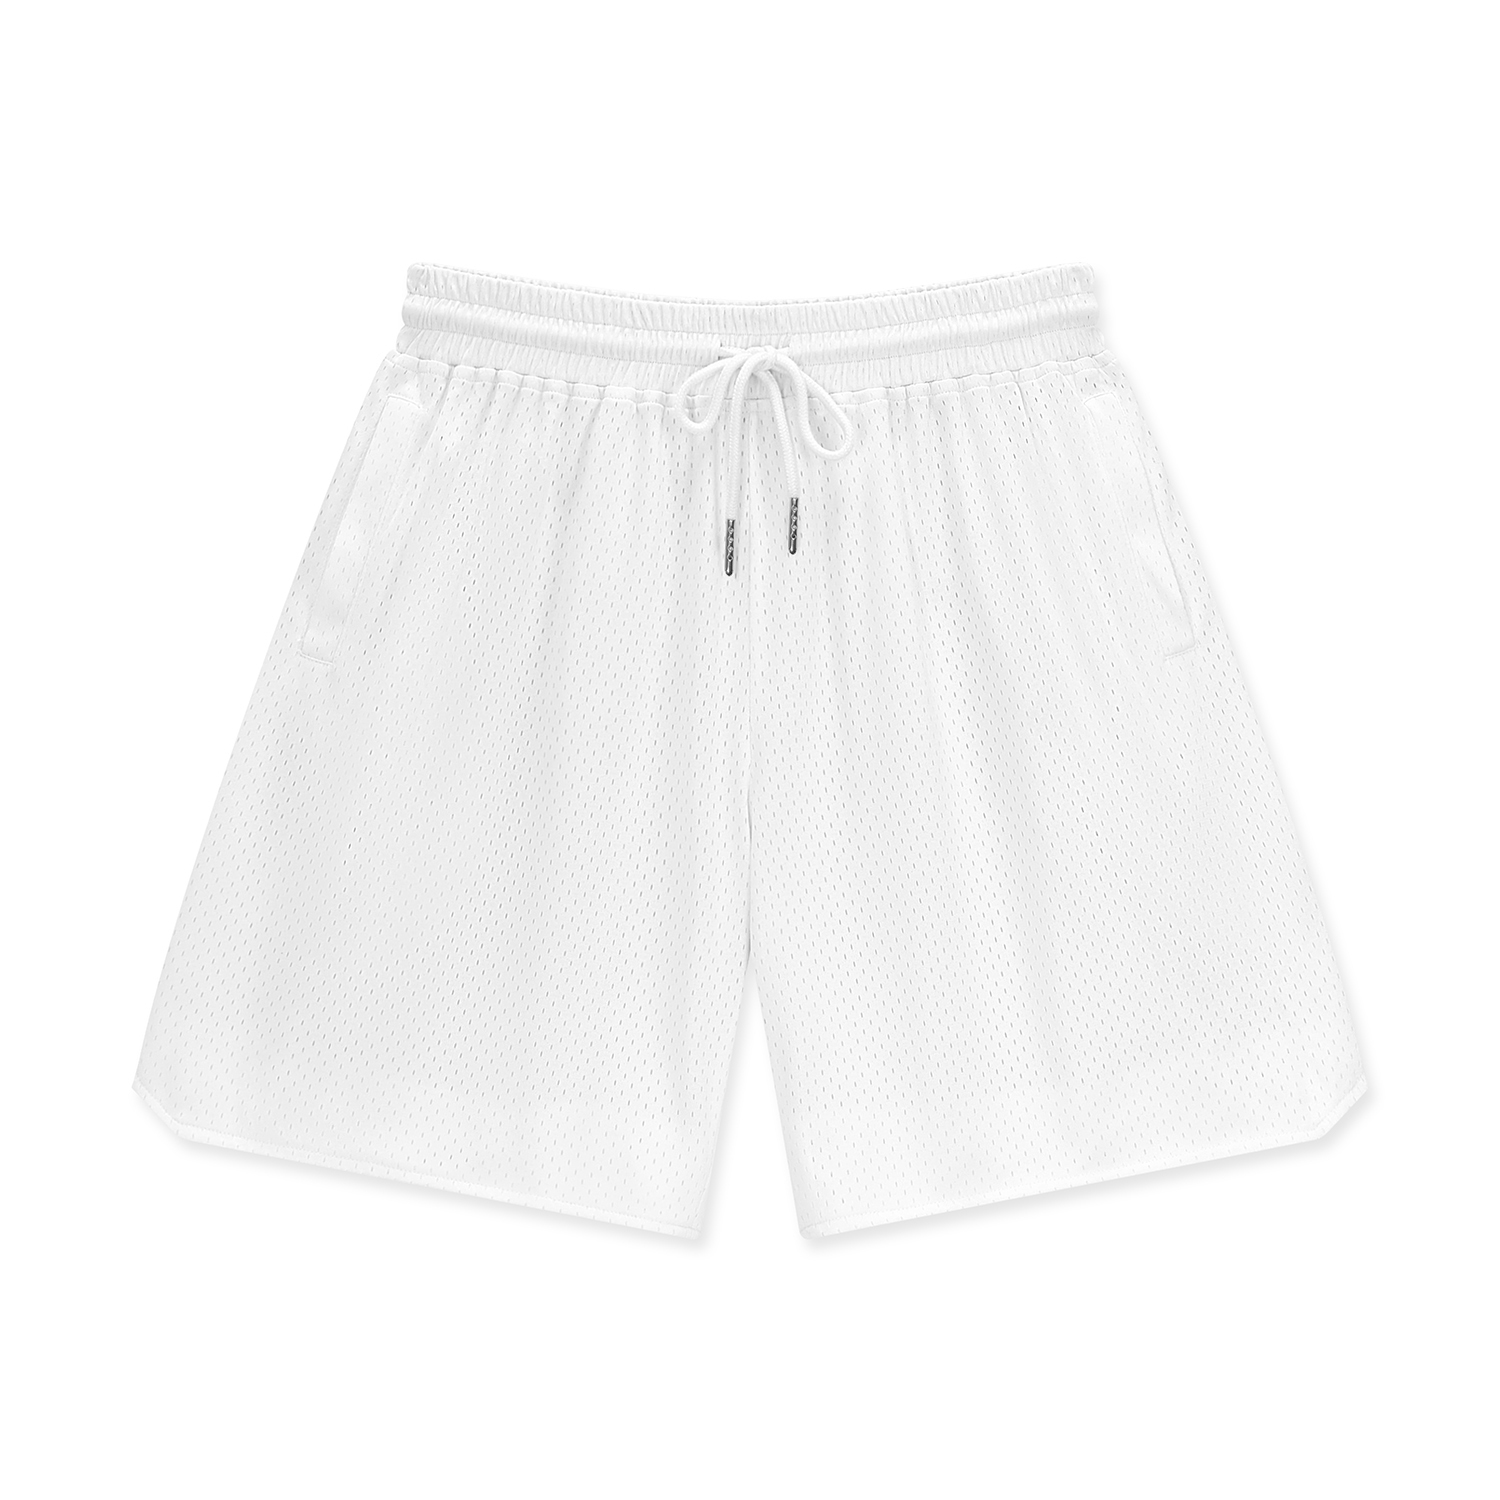 All-Over Print Men's Basketball Shorts Fast Drying | HugePOD-1